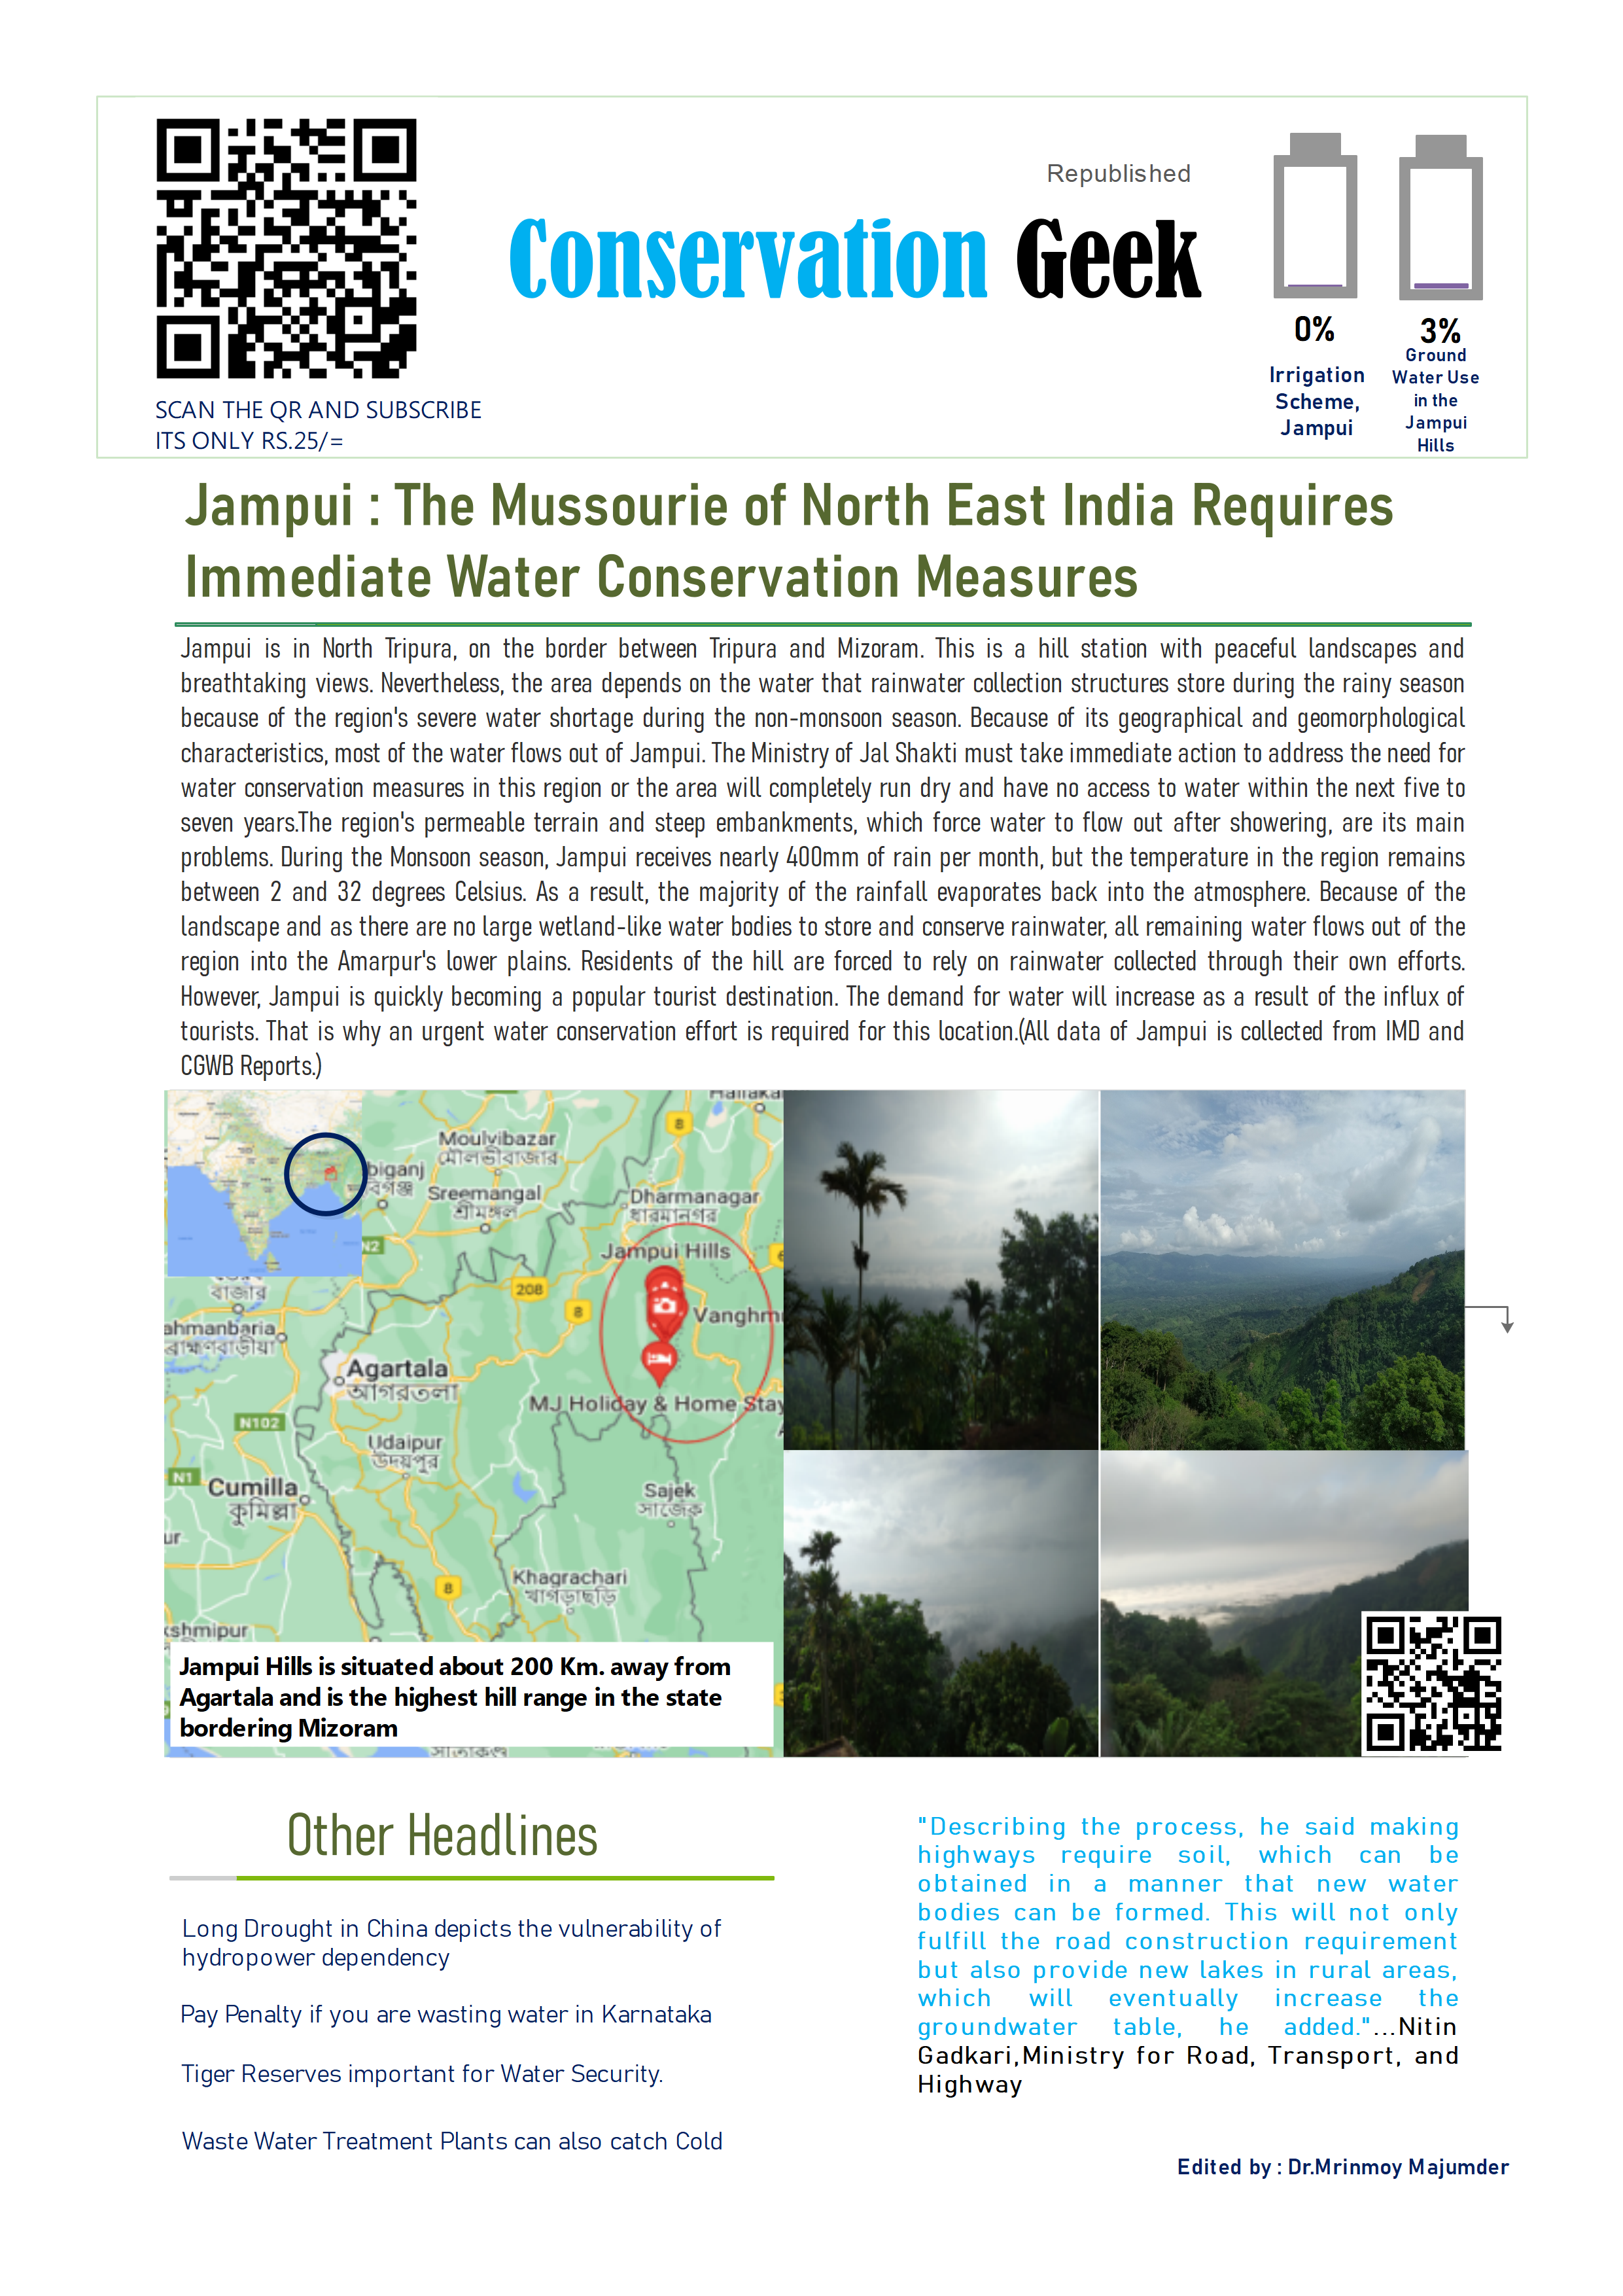 Case study of Jampui: The Mussourie of North East IndiaIt requires immediate water conservation measures